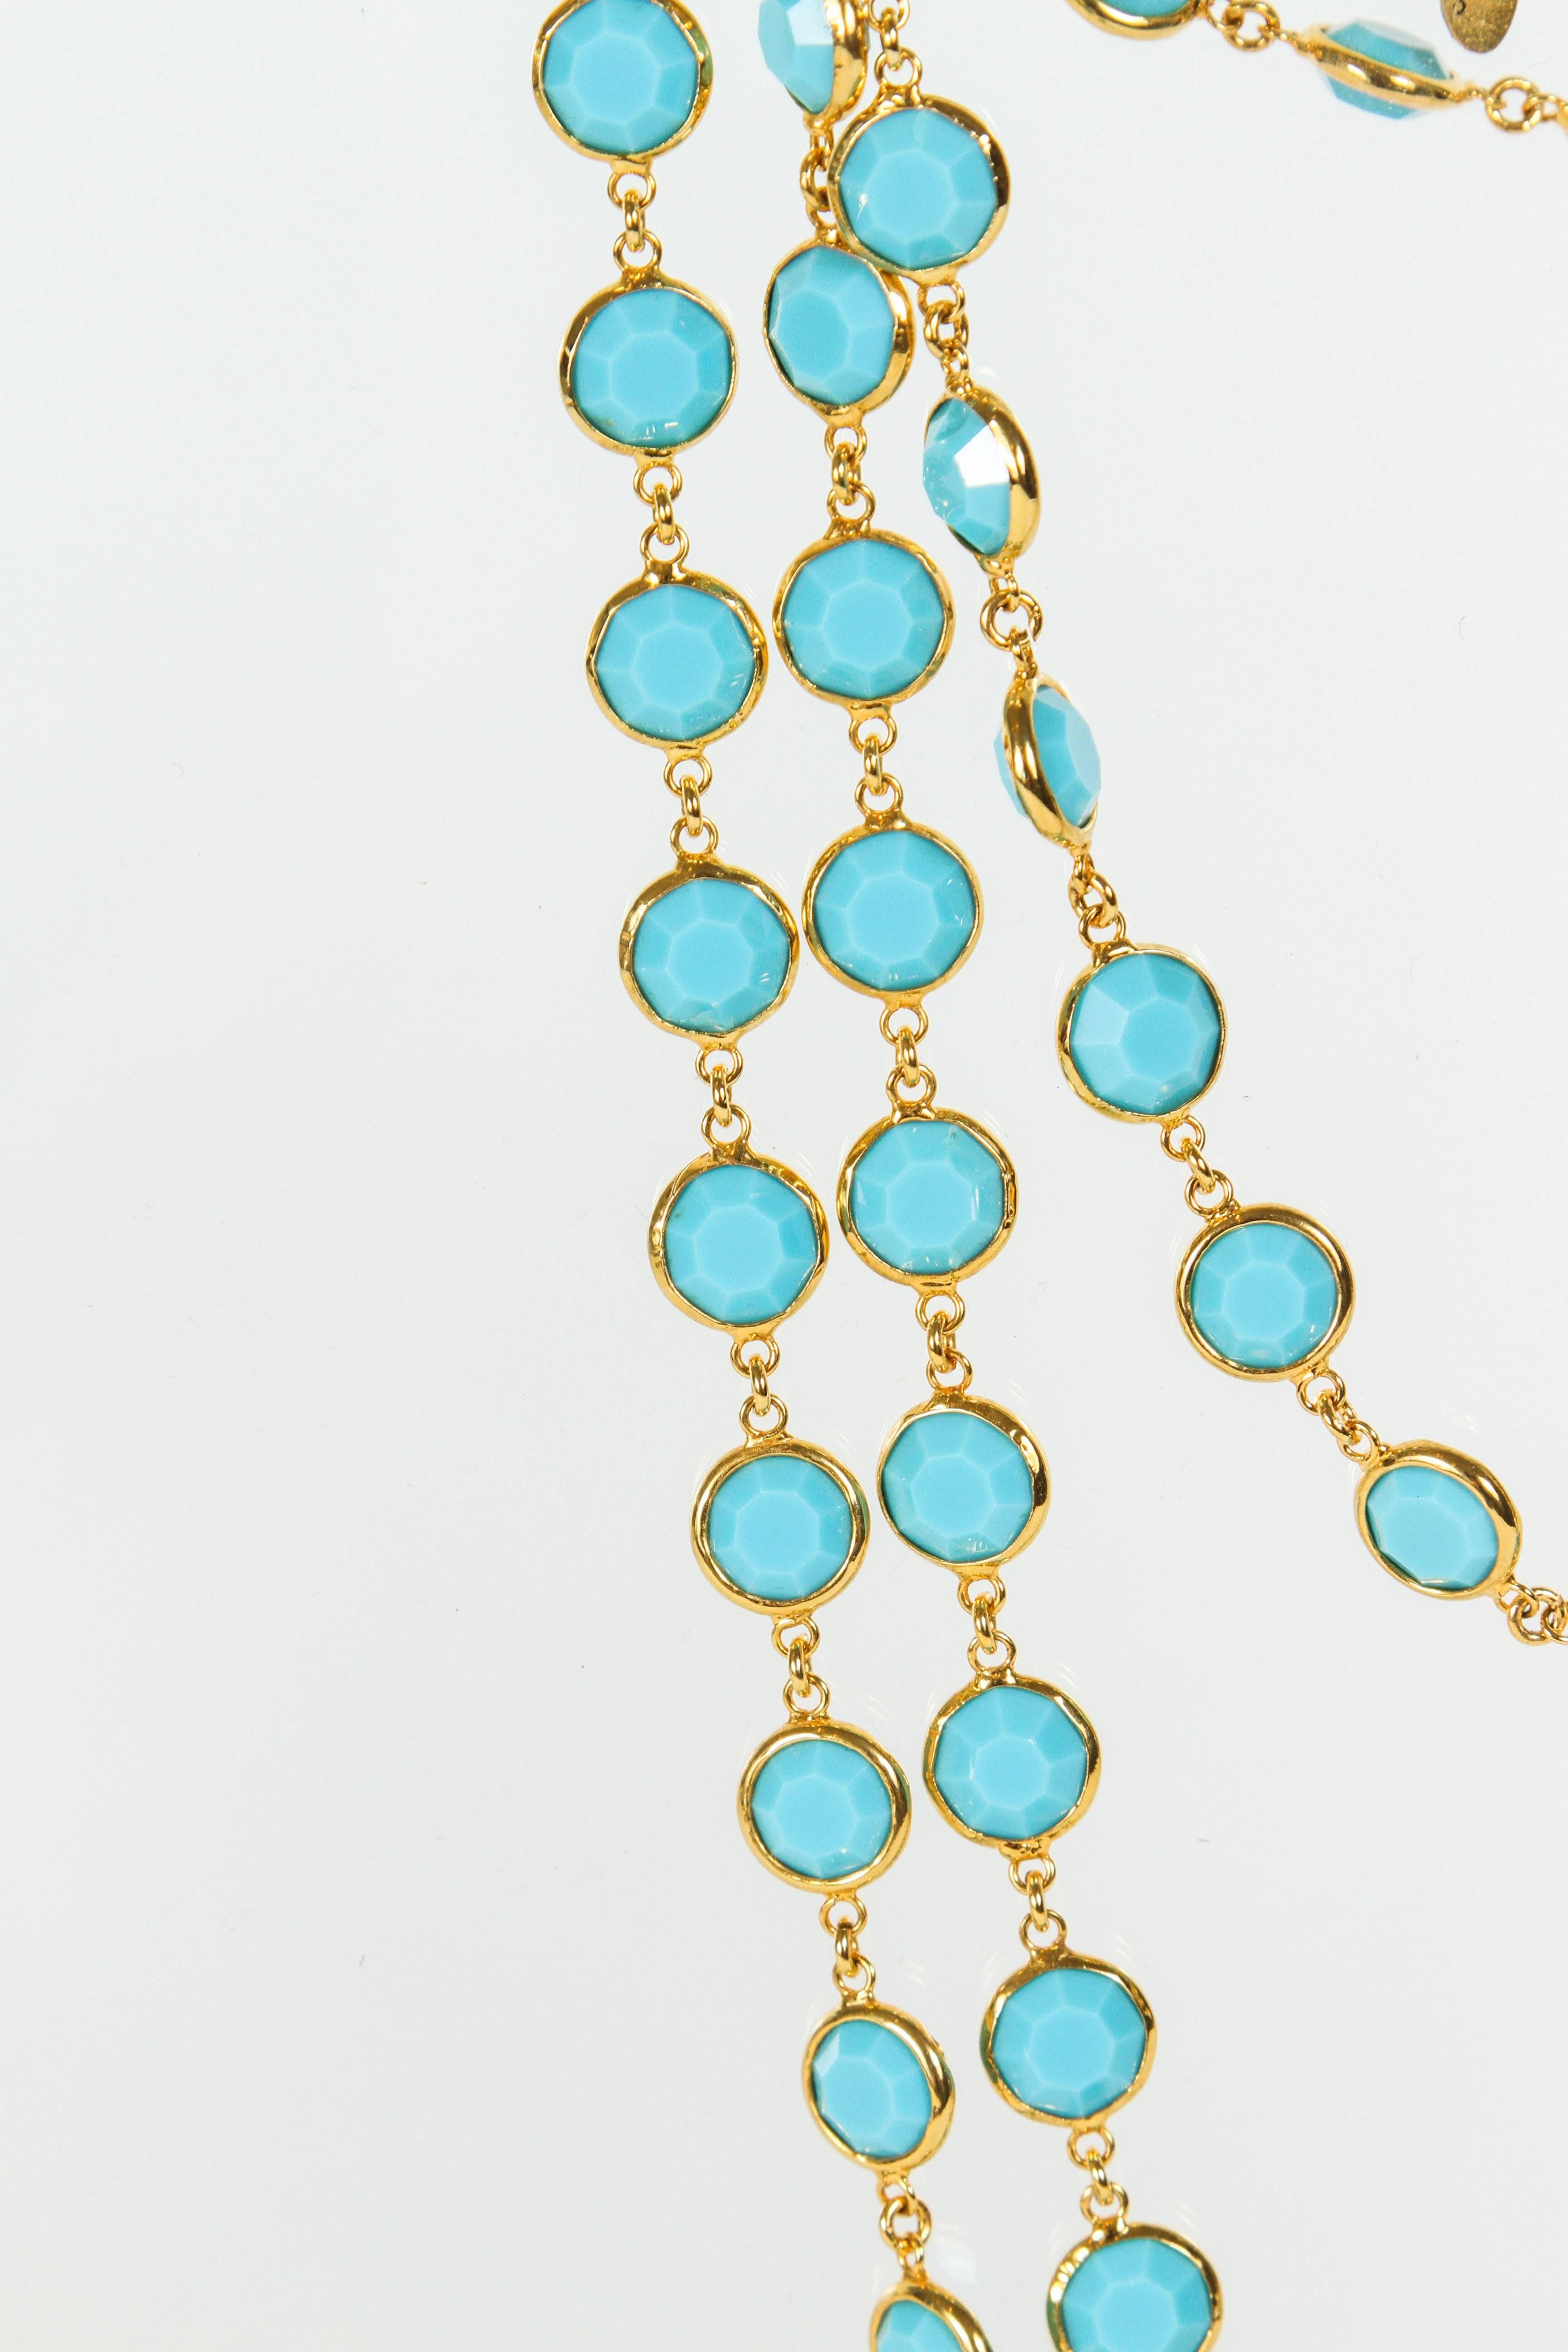 Women's Chanel Sautoir with Faceted Turquoise Stones